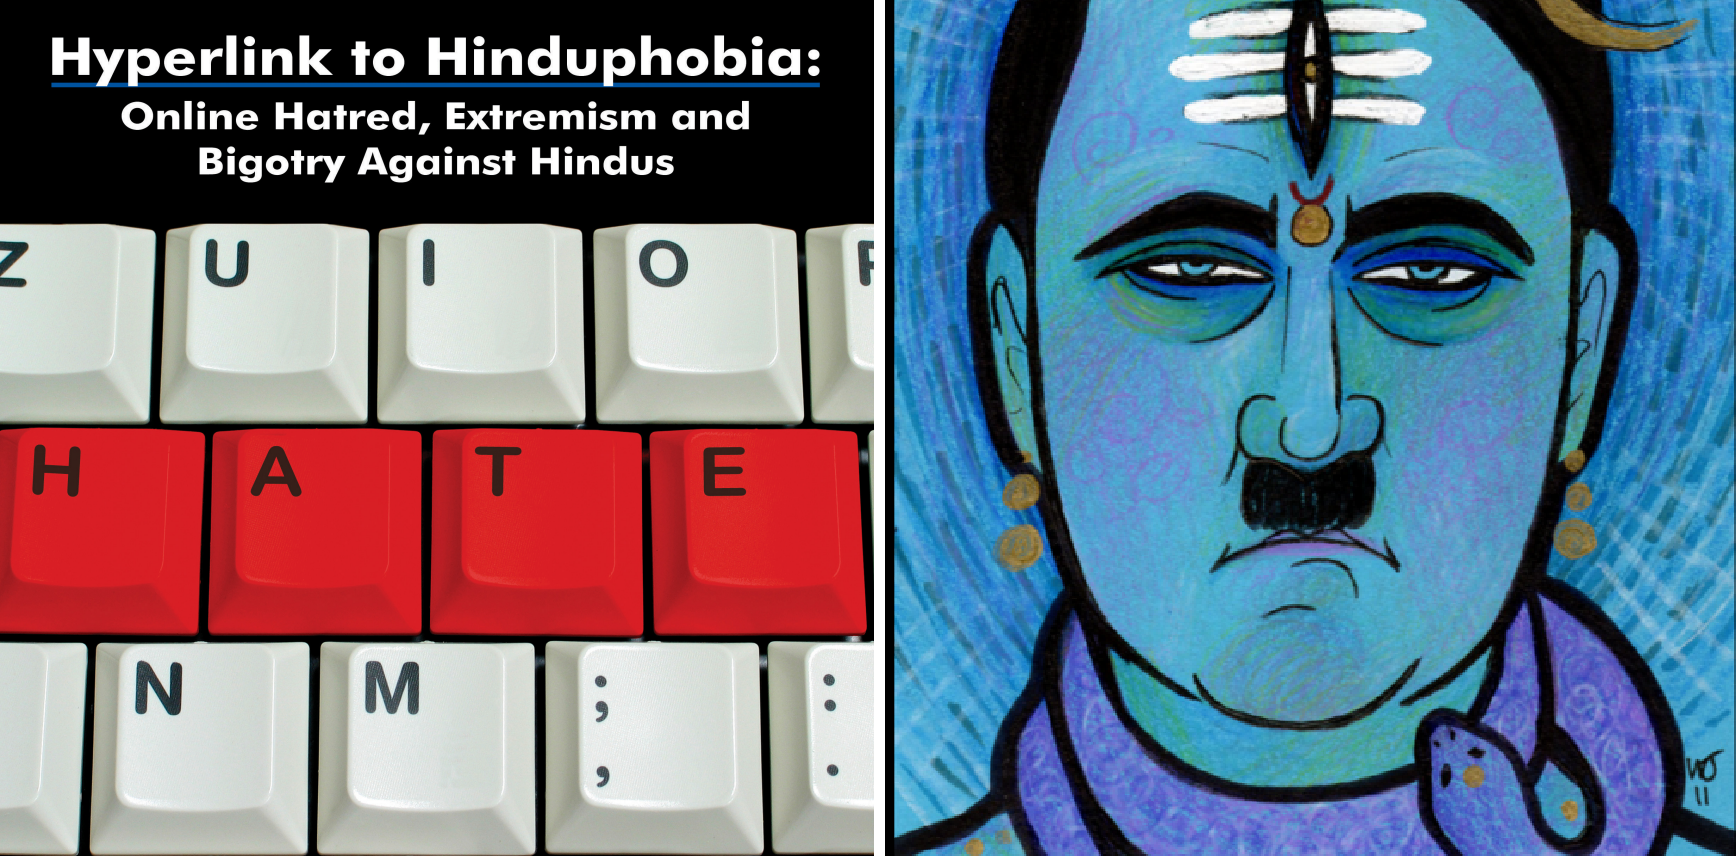 Hindu Hate on the Internet – A Growing Concern